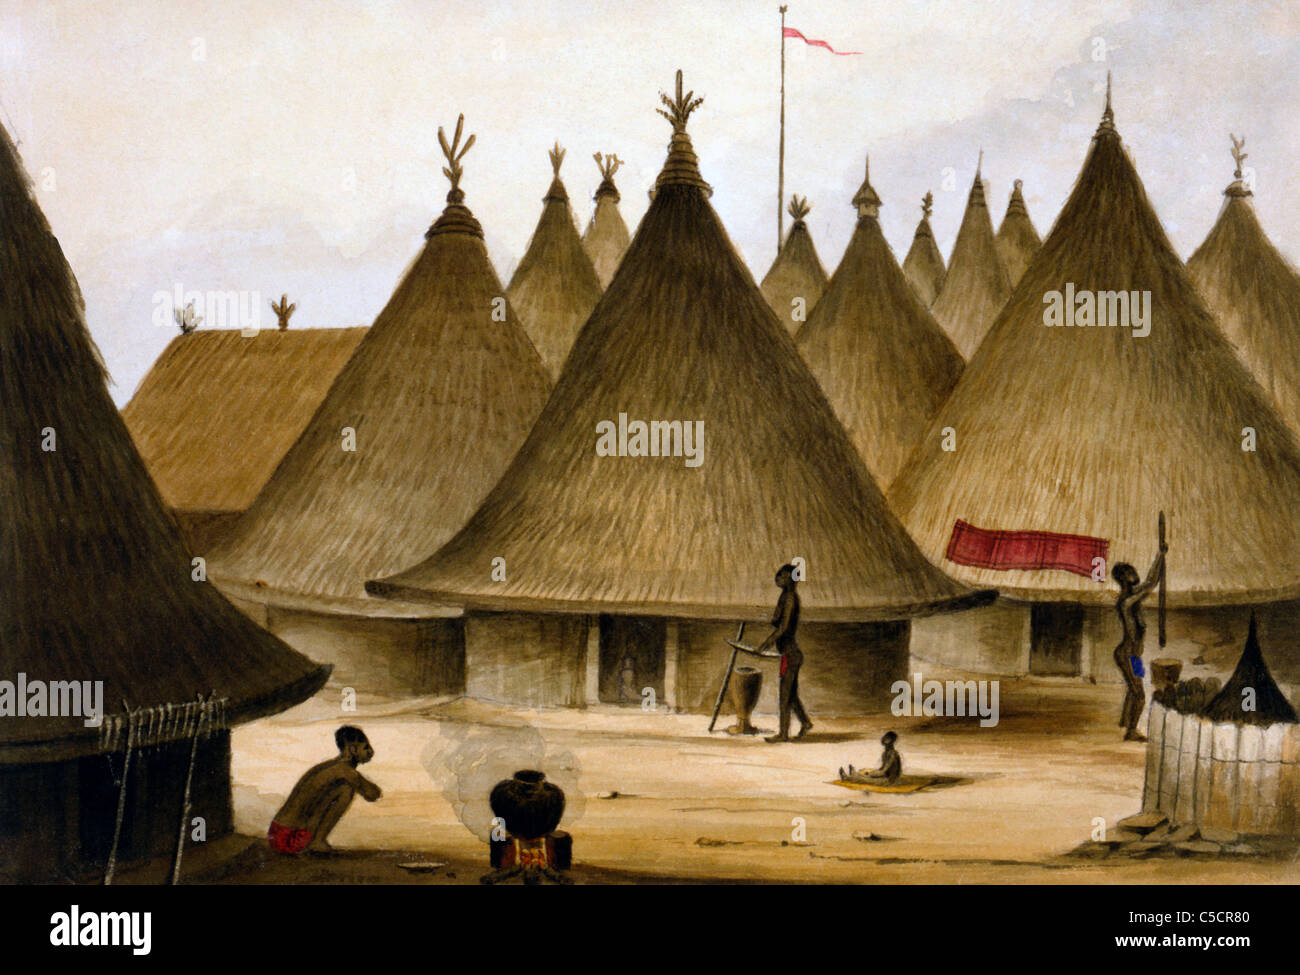 Native village - View of village showing traditional dwellings, circa 1880 Stock Photo